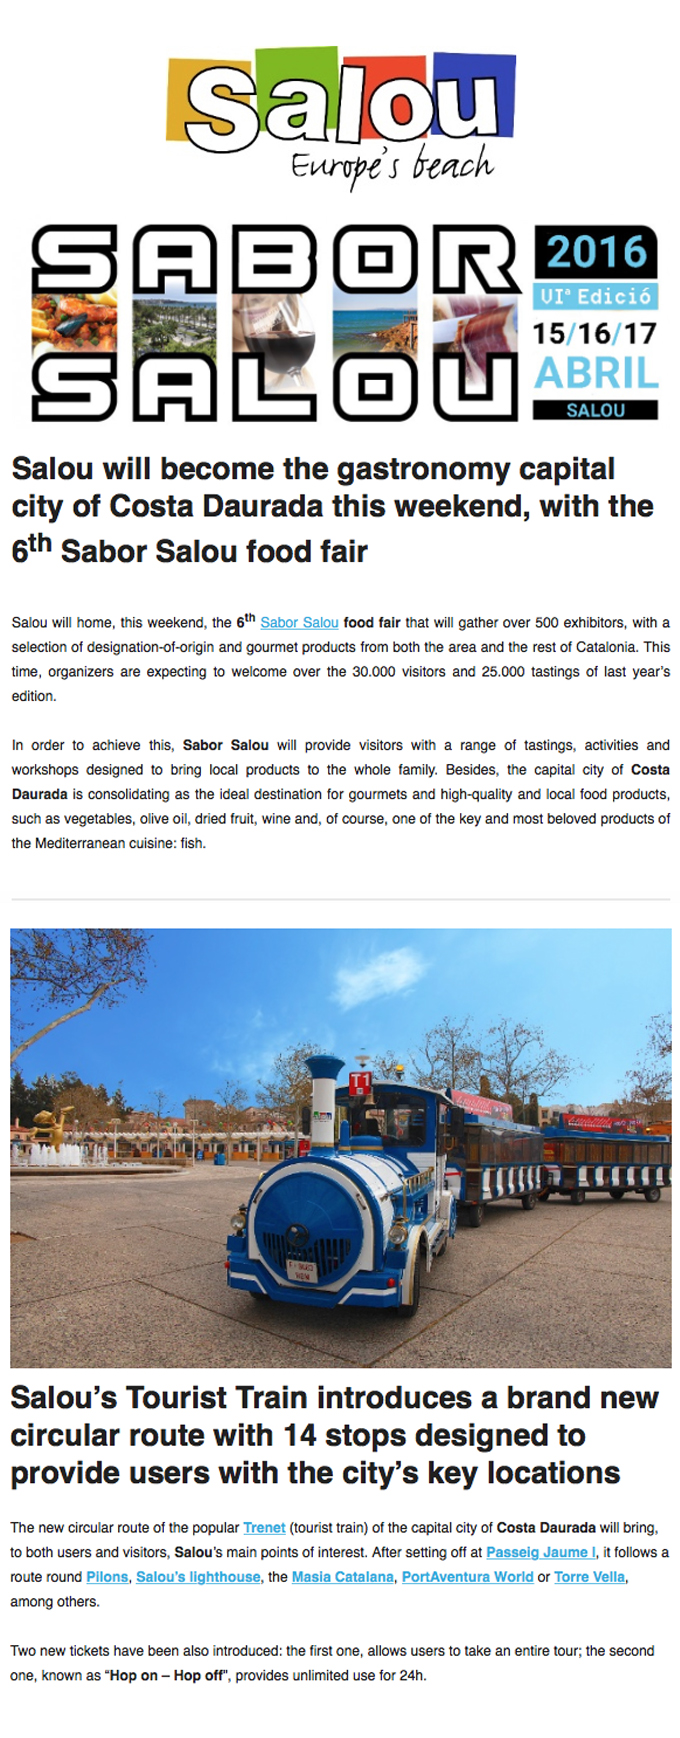 Salou will become the gastronomy capital city of Costa Daurada this weekend, with the 6th Sabor Salou food fair